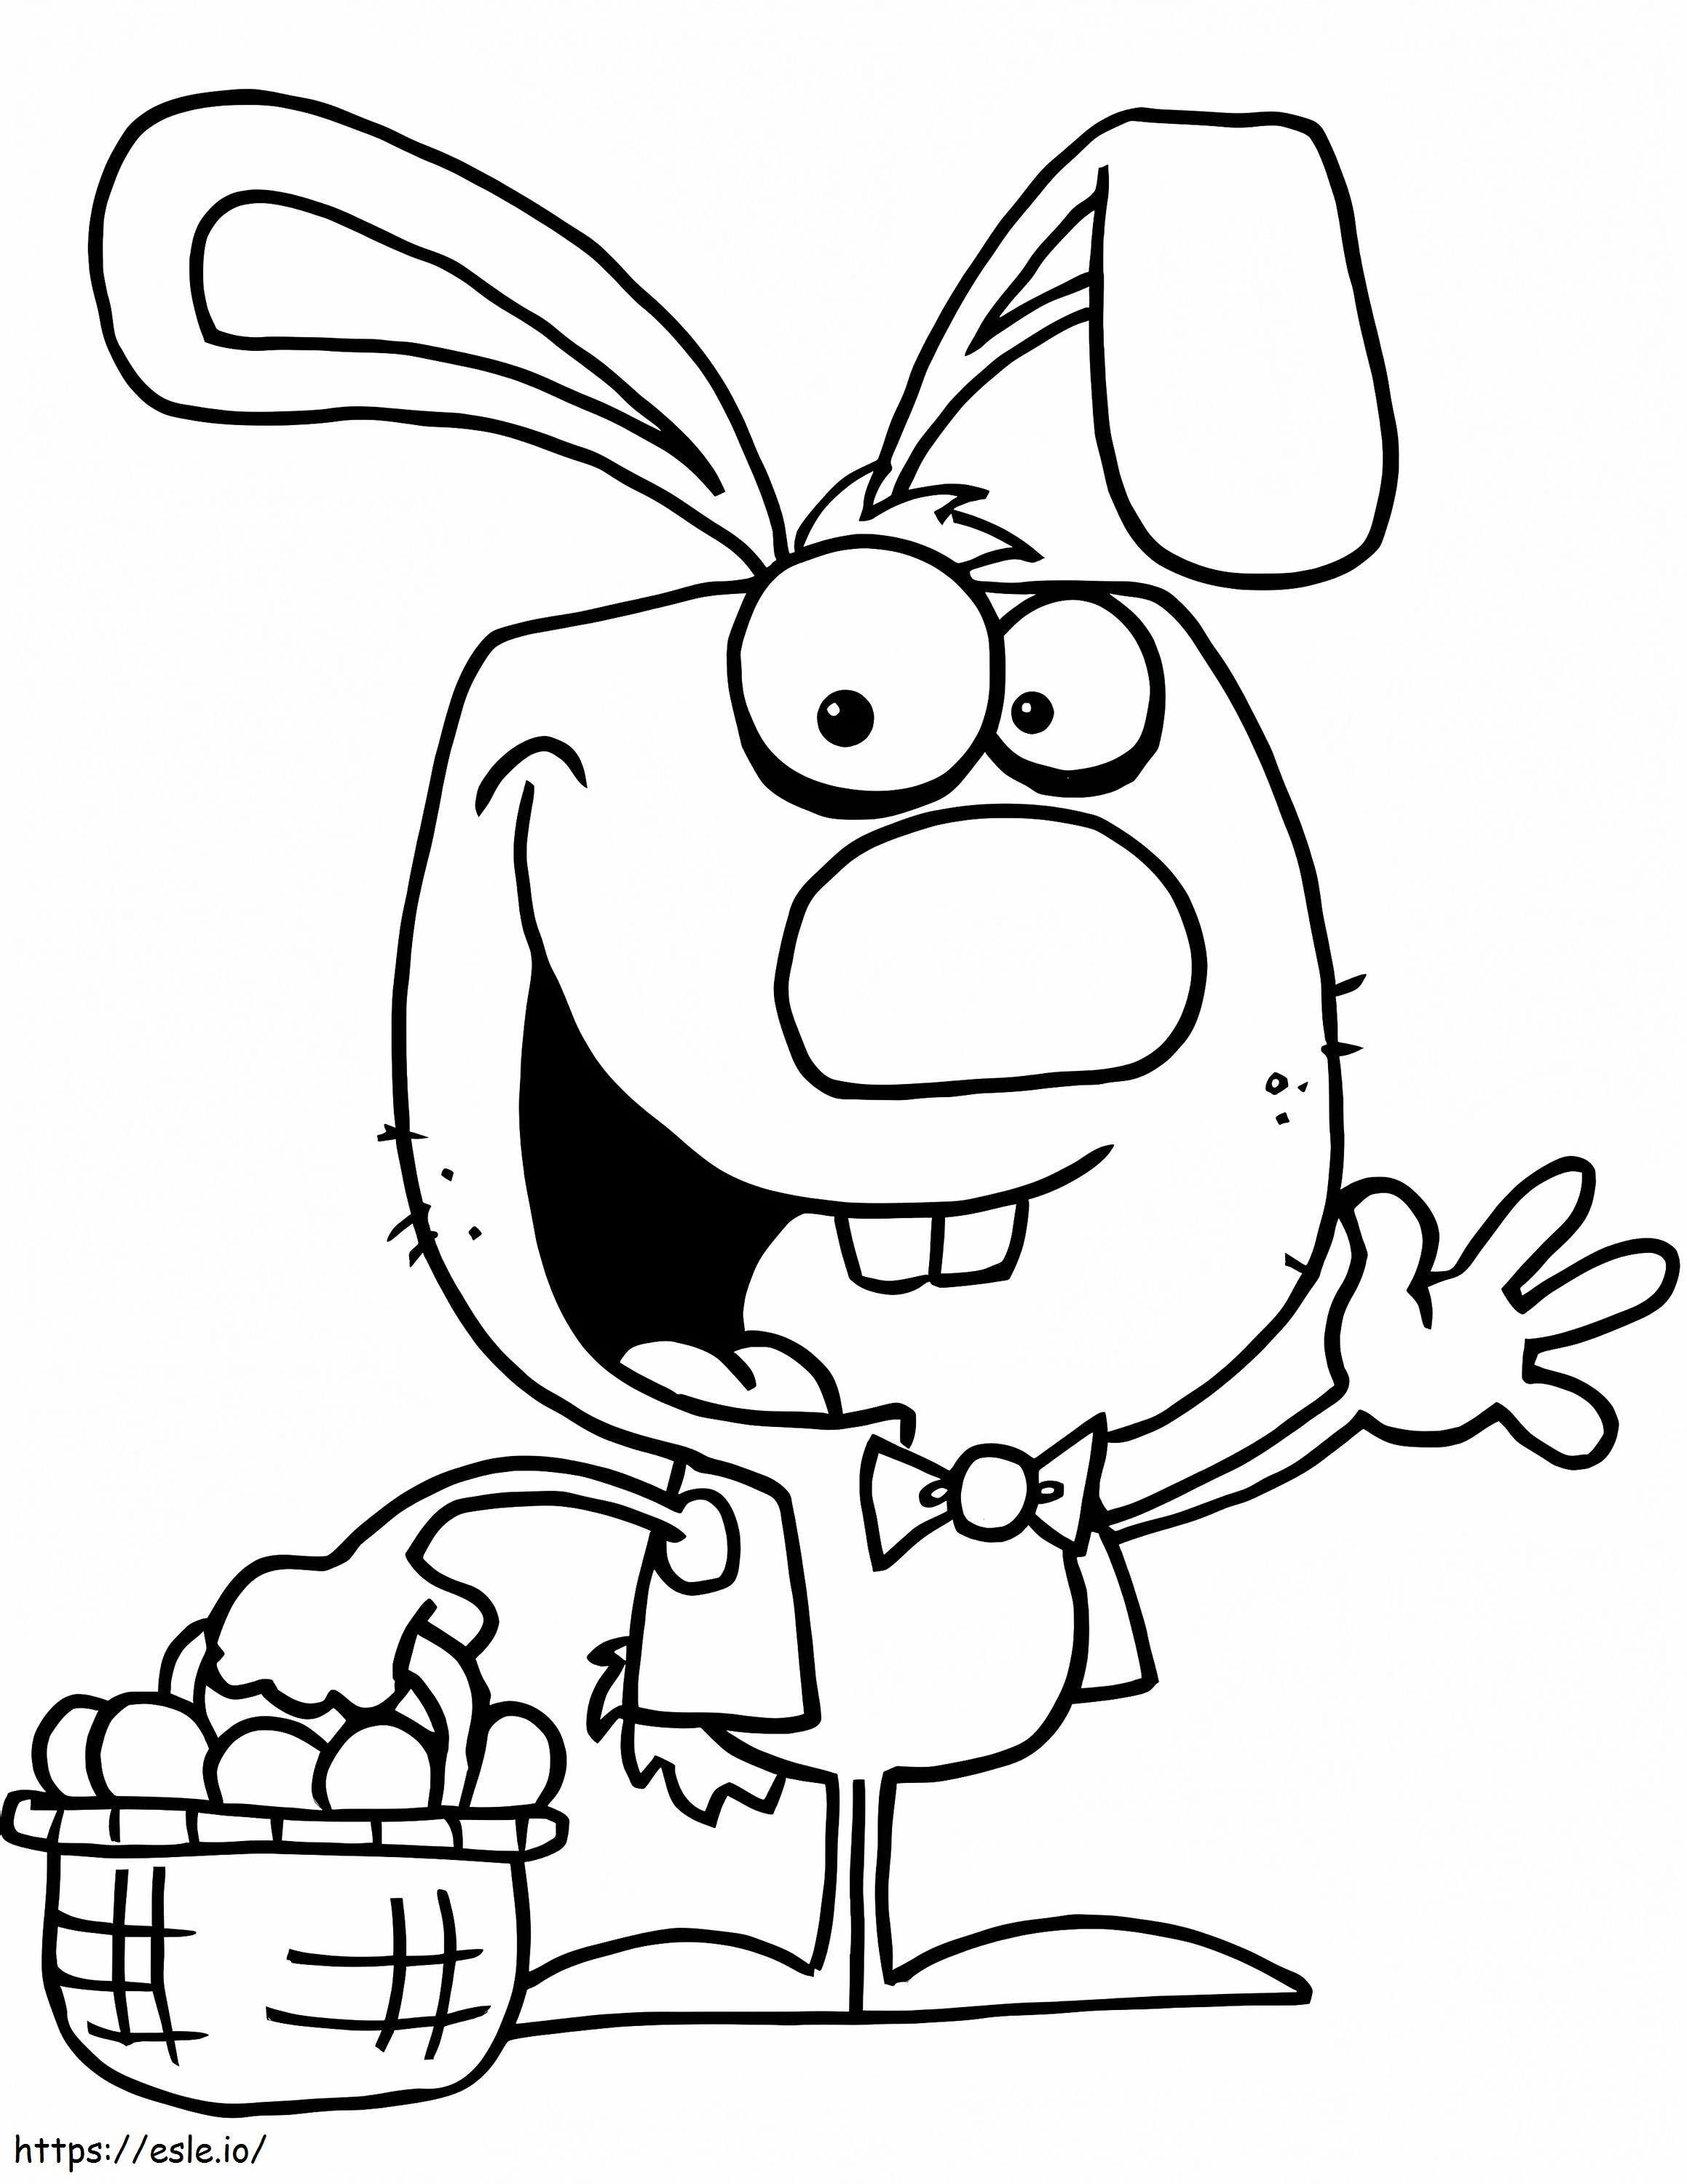 Easter Bunny With Basket coloring page